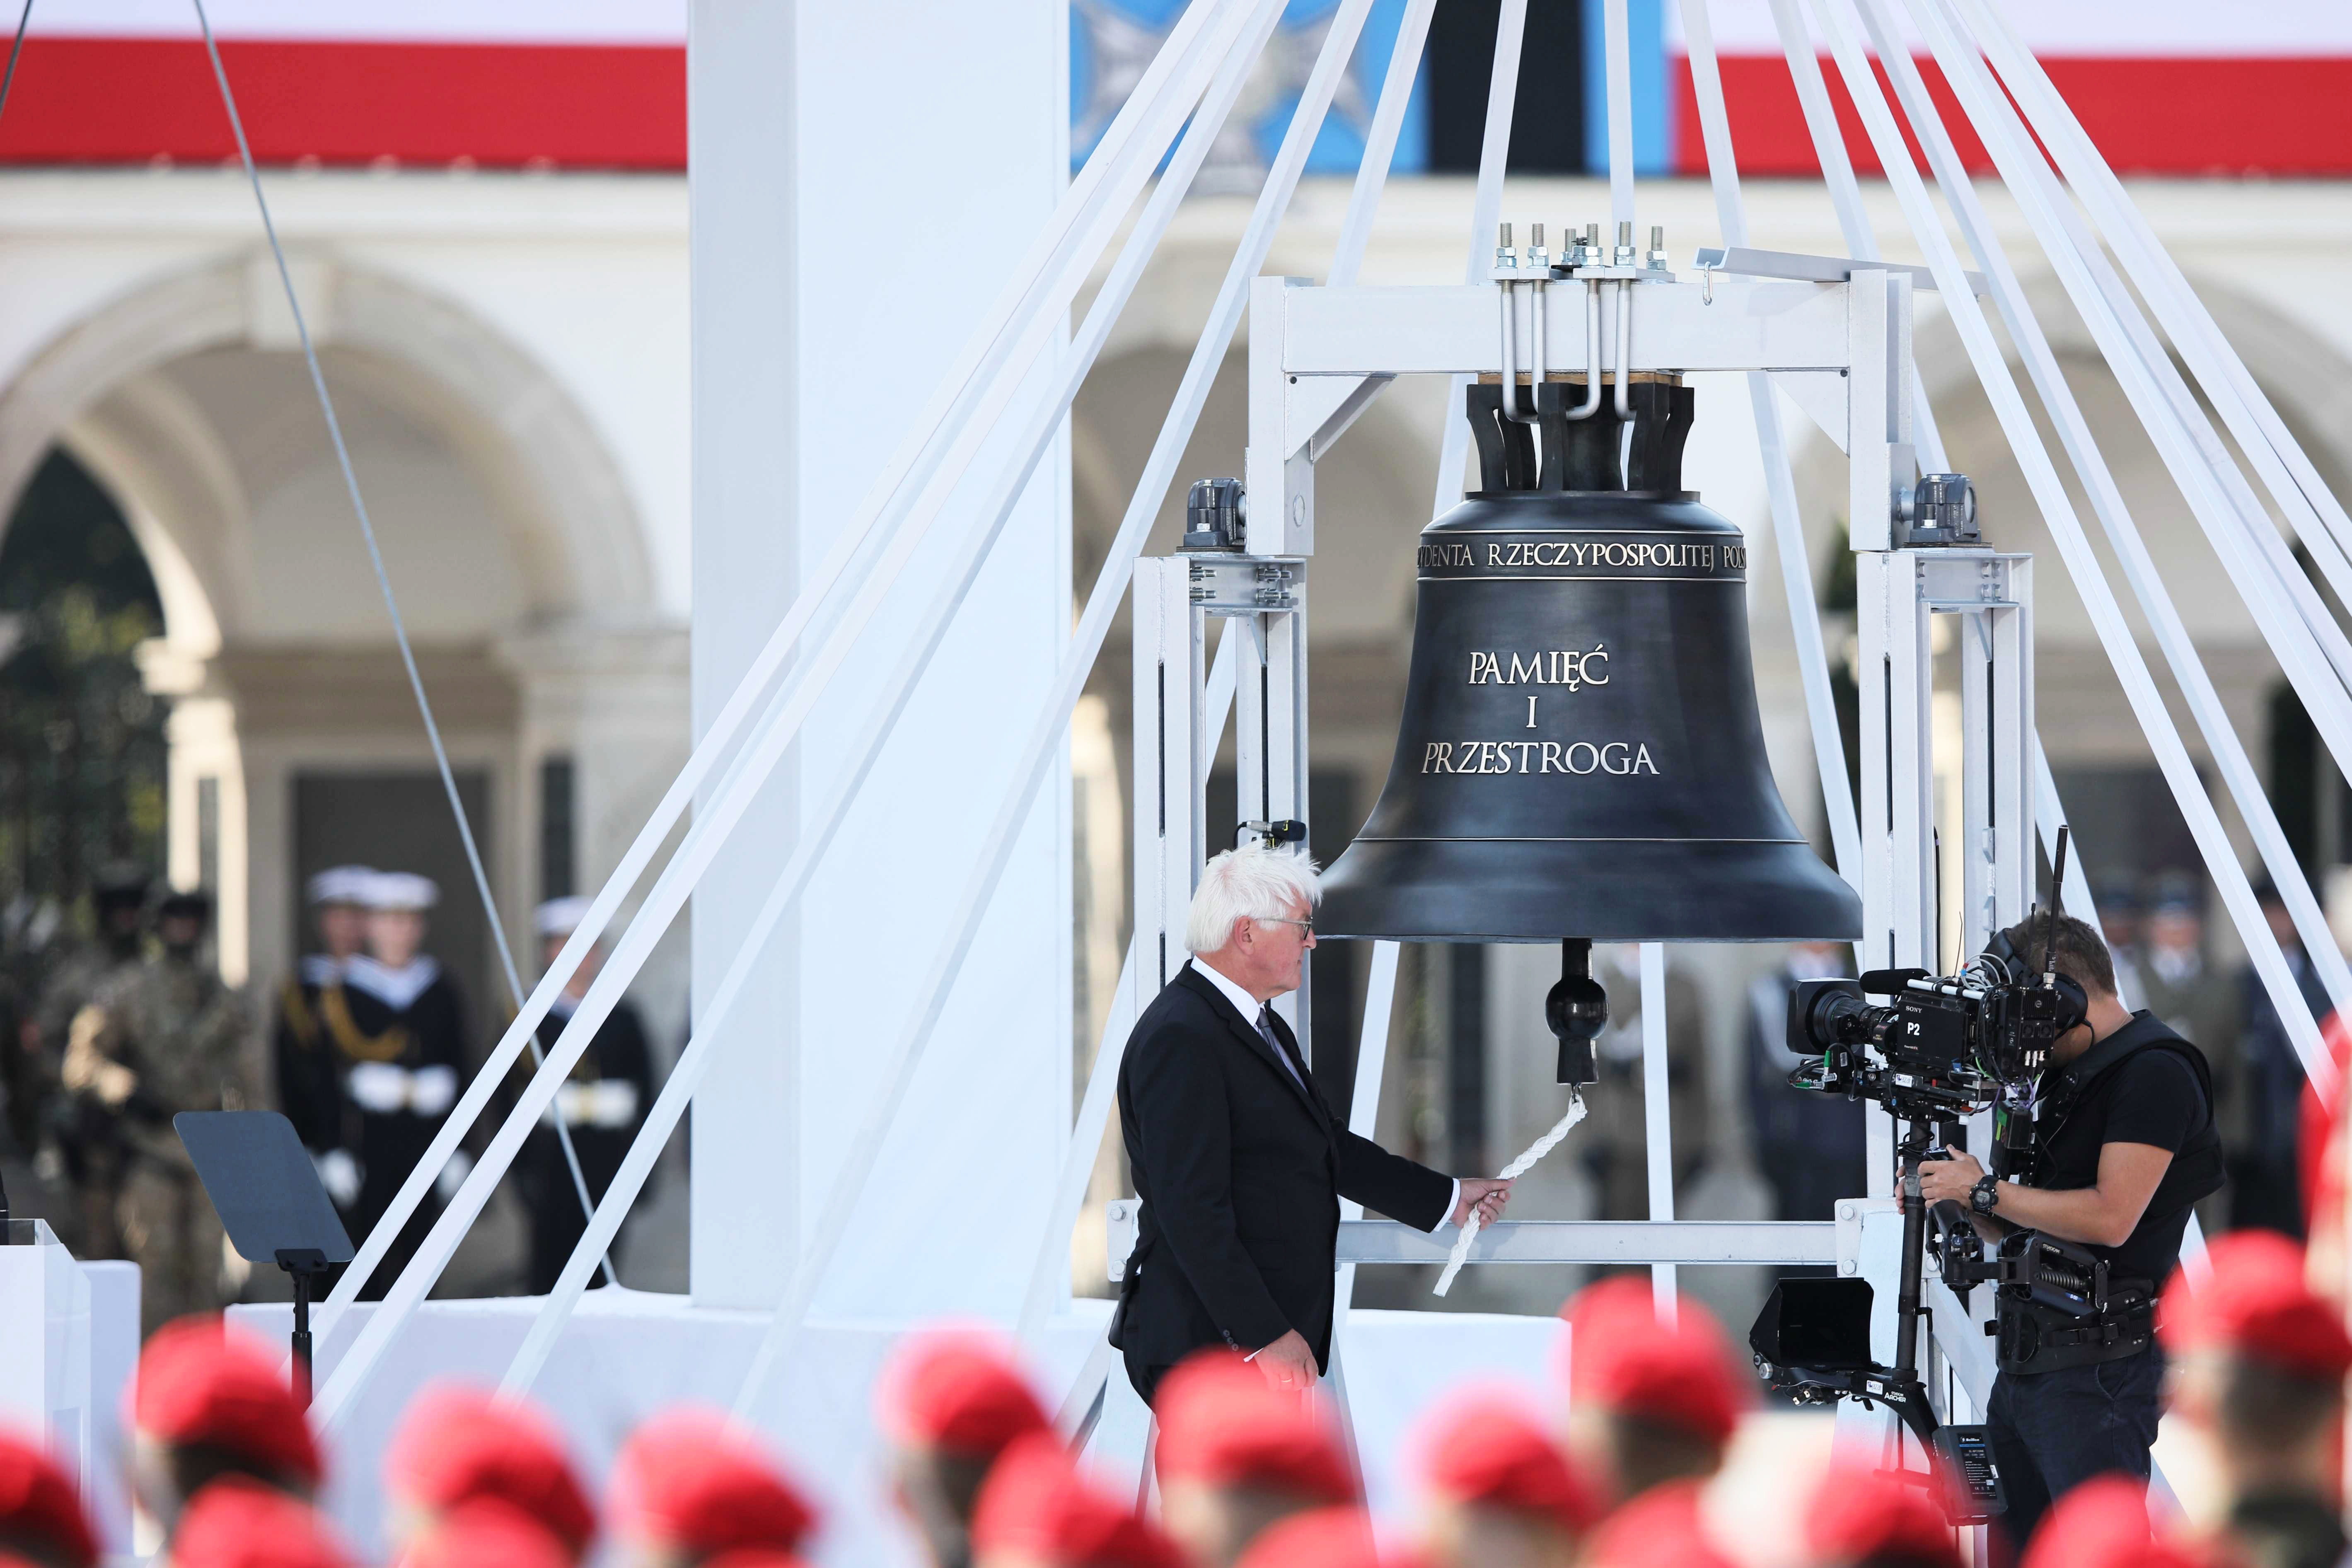 epa07809830 German President Frank-Walter Steinmeier rings the Bell of Memory and Warning during the ceremony marking 80th anniversary of World War II outbreak at the Pilsudski Square in Warsaw, Poland, 01 September 2019. The Luftwaffe attack on the Polish city of Wielun in the early morning of 01 September 1939 marked the beginning of World War II. A few minutes later, the German battleship SMS Schleswig-Holstein bombarded the Gdansk Westerplatte.  EPA/LESZEK SZYMANSKI POLAND OUT